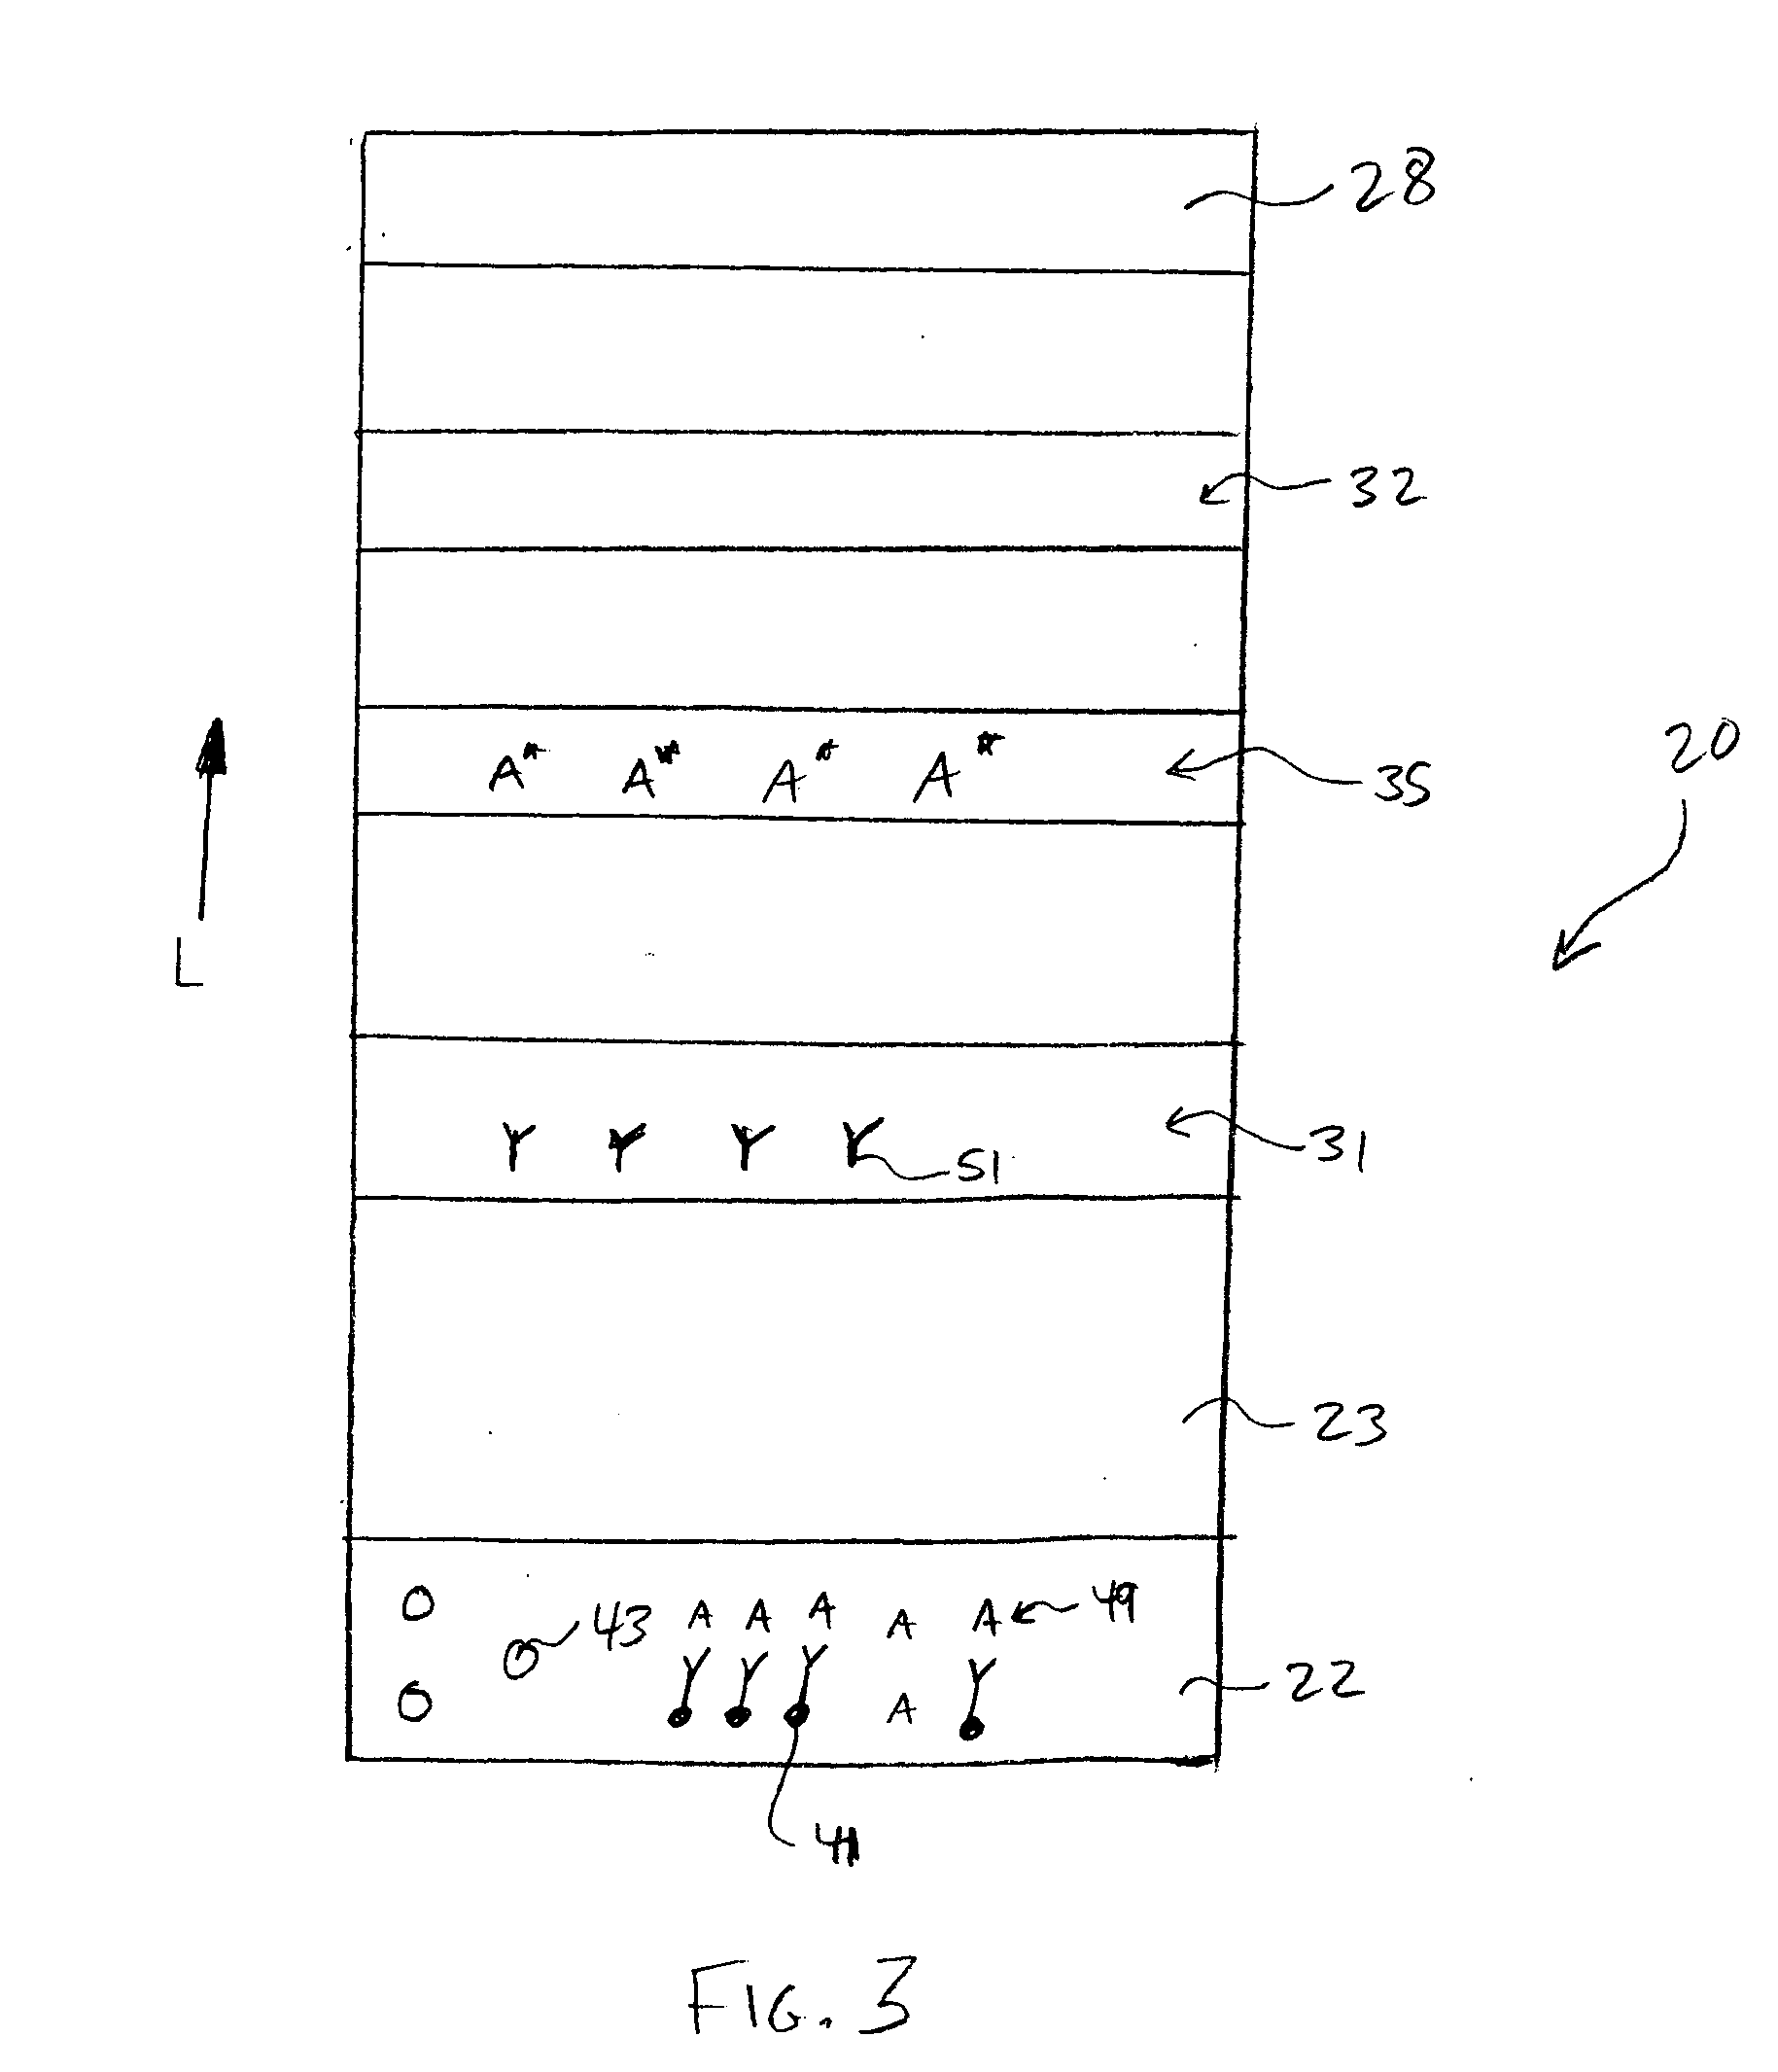 Assay devices having detection capabilities within the hook effect region